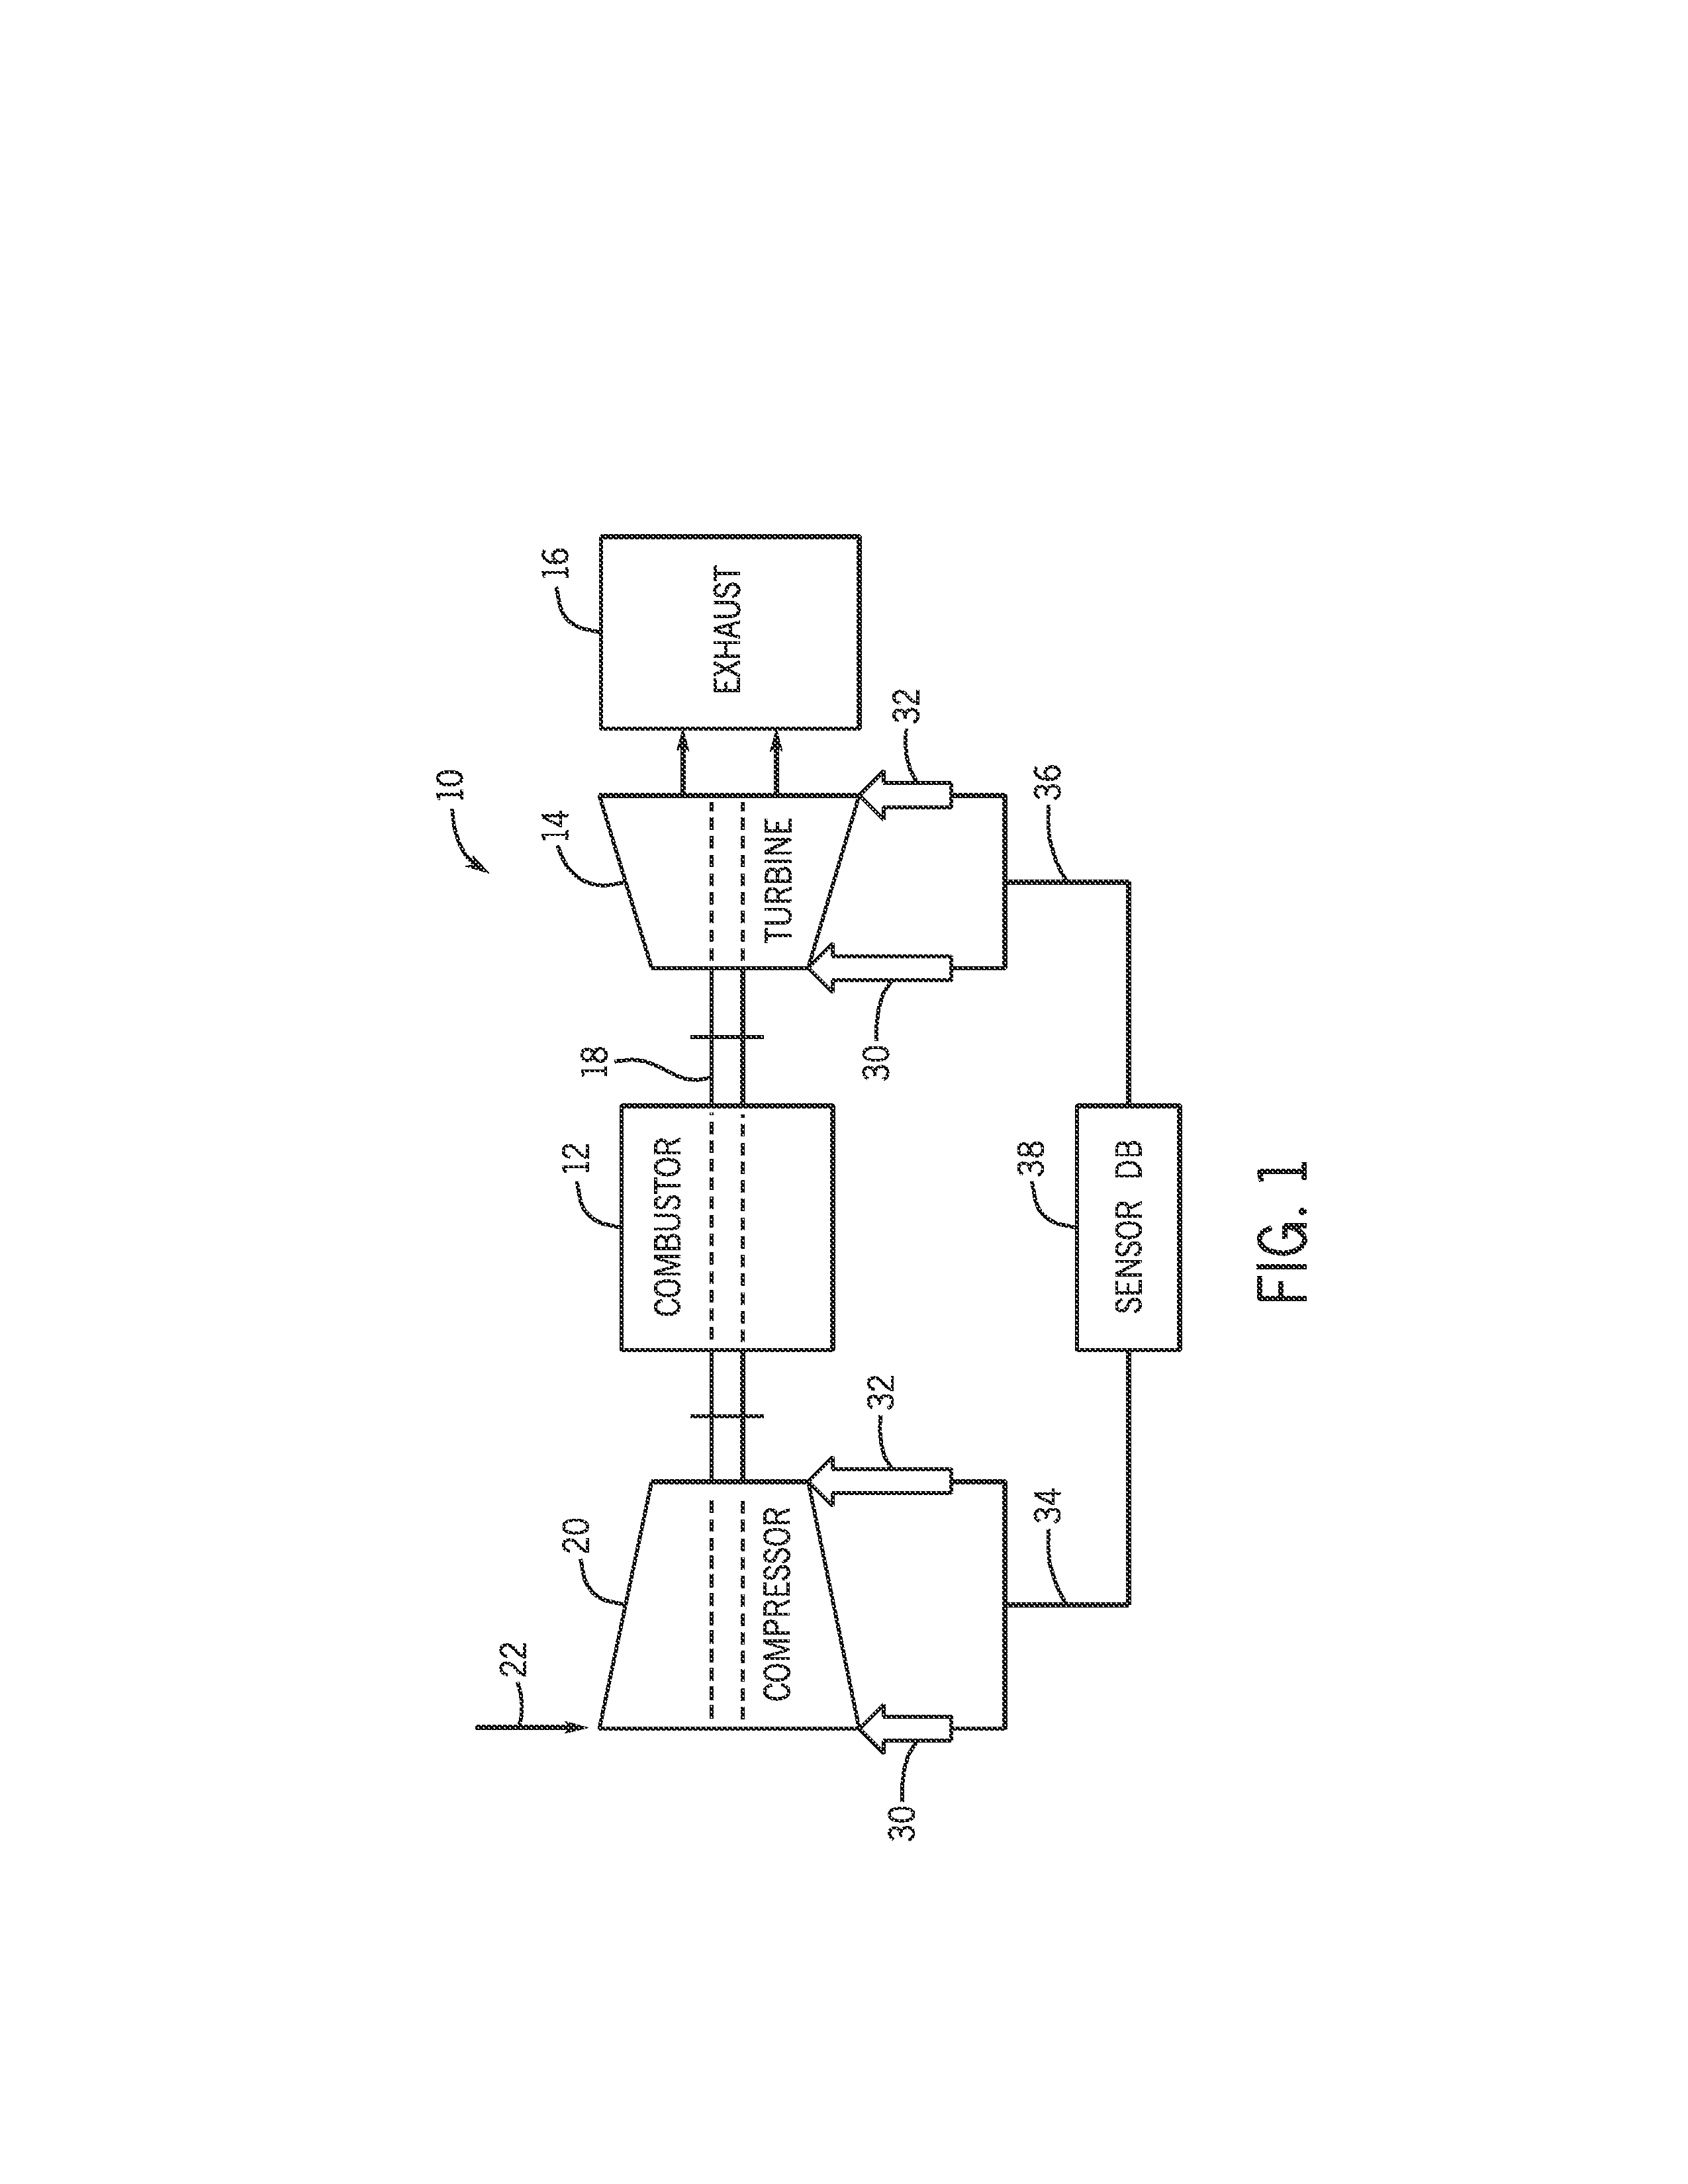 Method and system for maintenance of turbomachinery